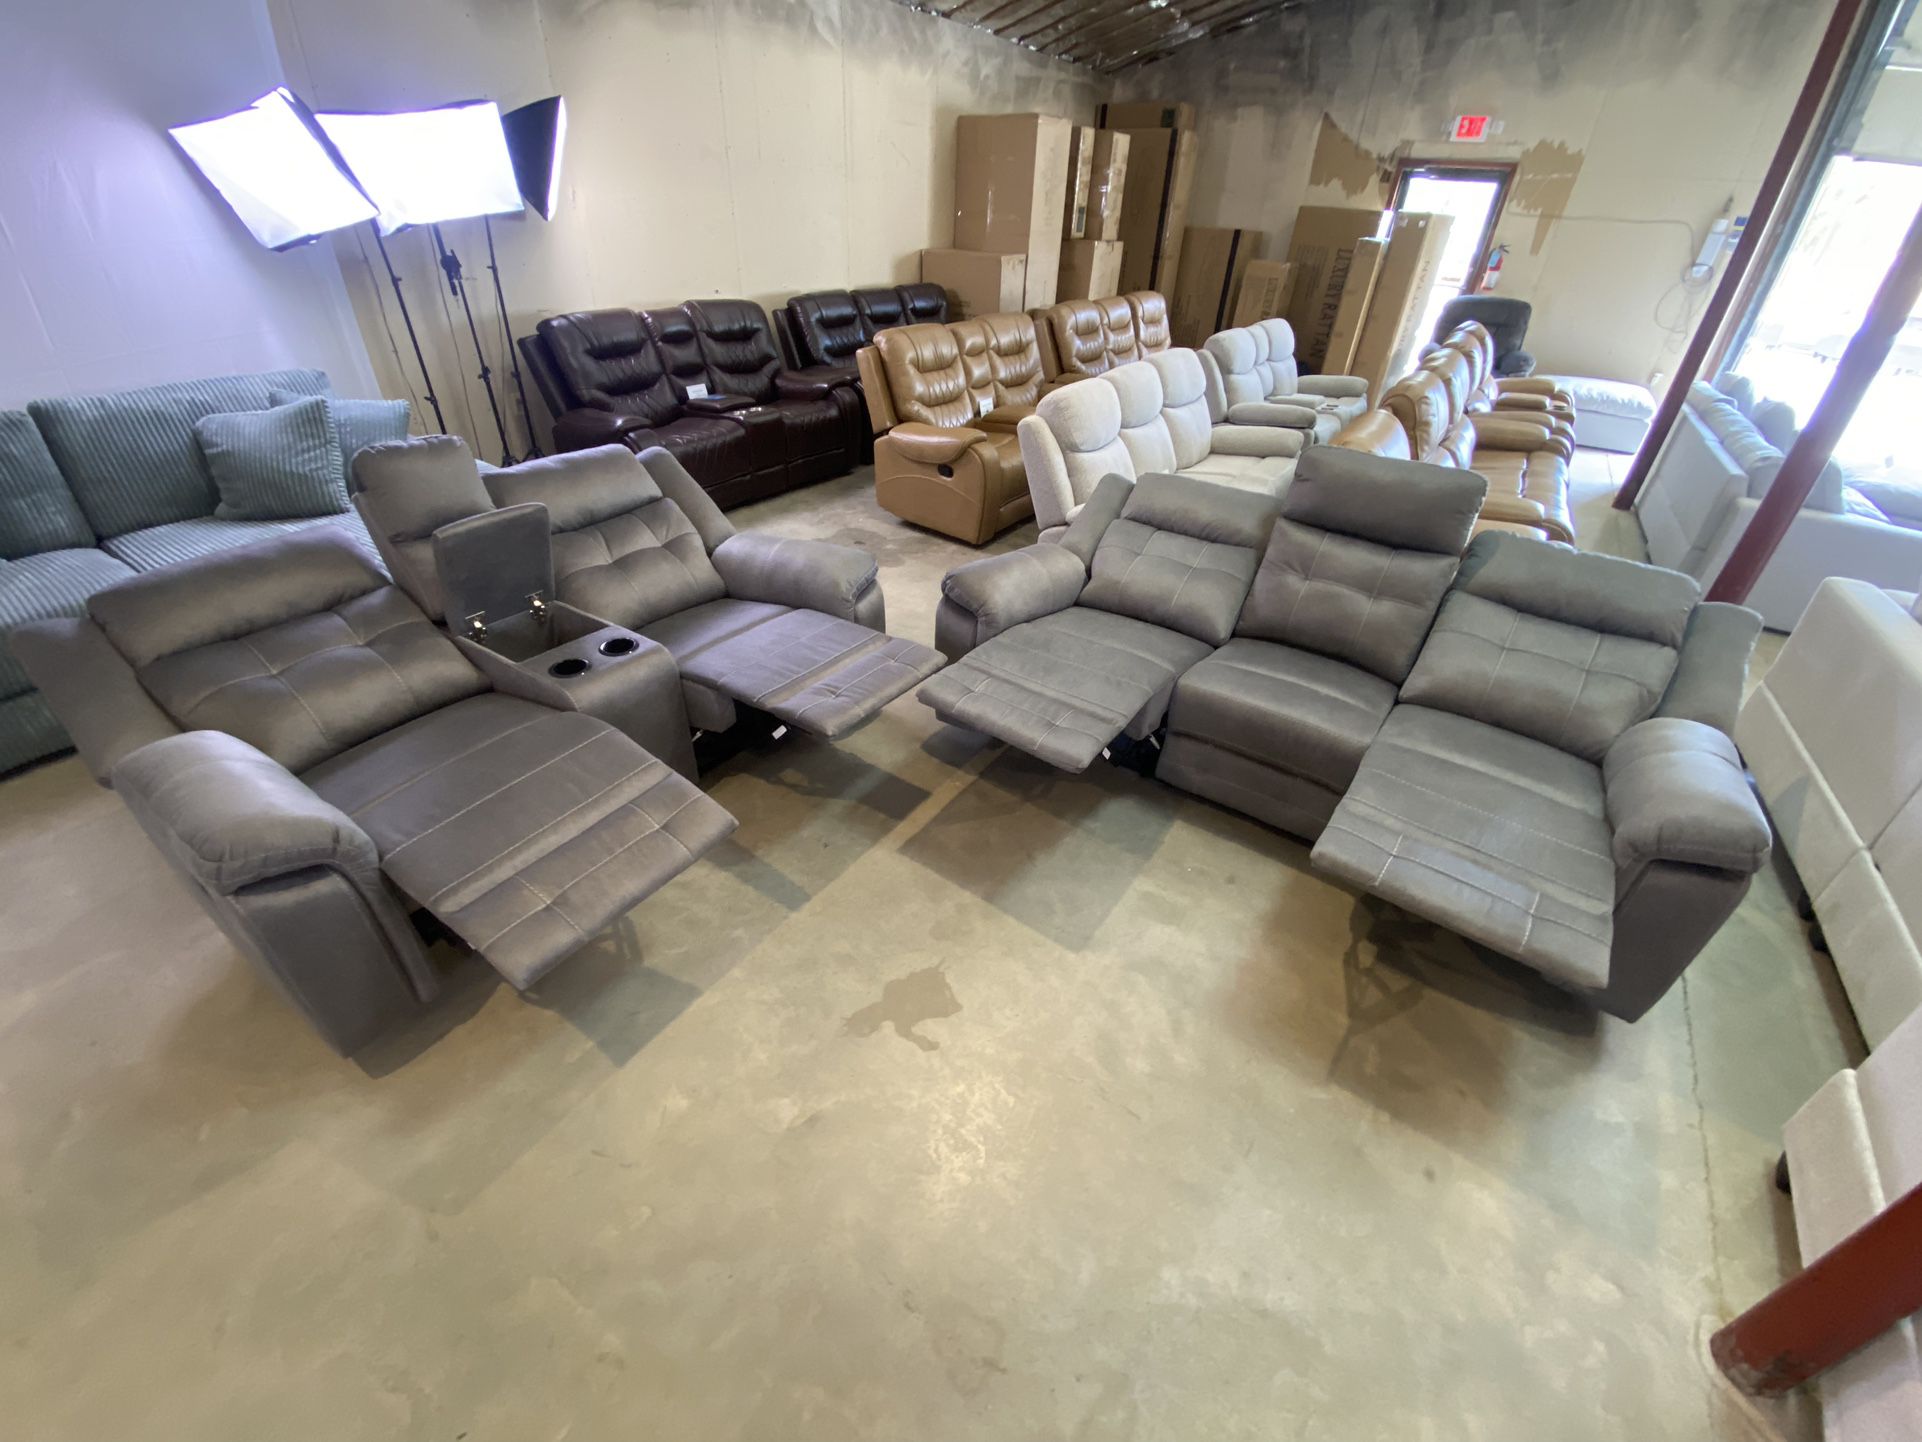 FREE DELIVERY AND INSTALLATION - NEW IN BOX! Recliner Sofa and Loveseat! Microfiber FabricGray Color